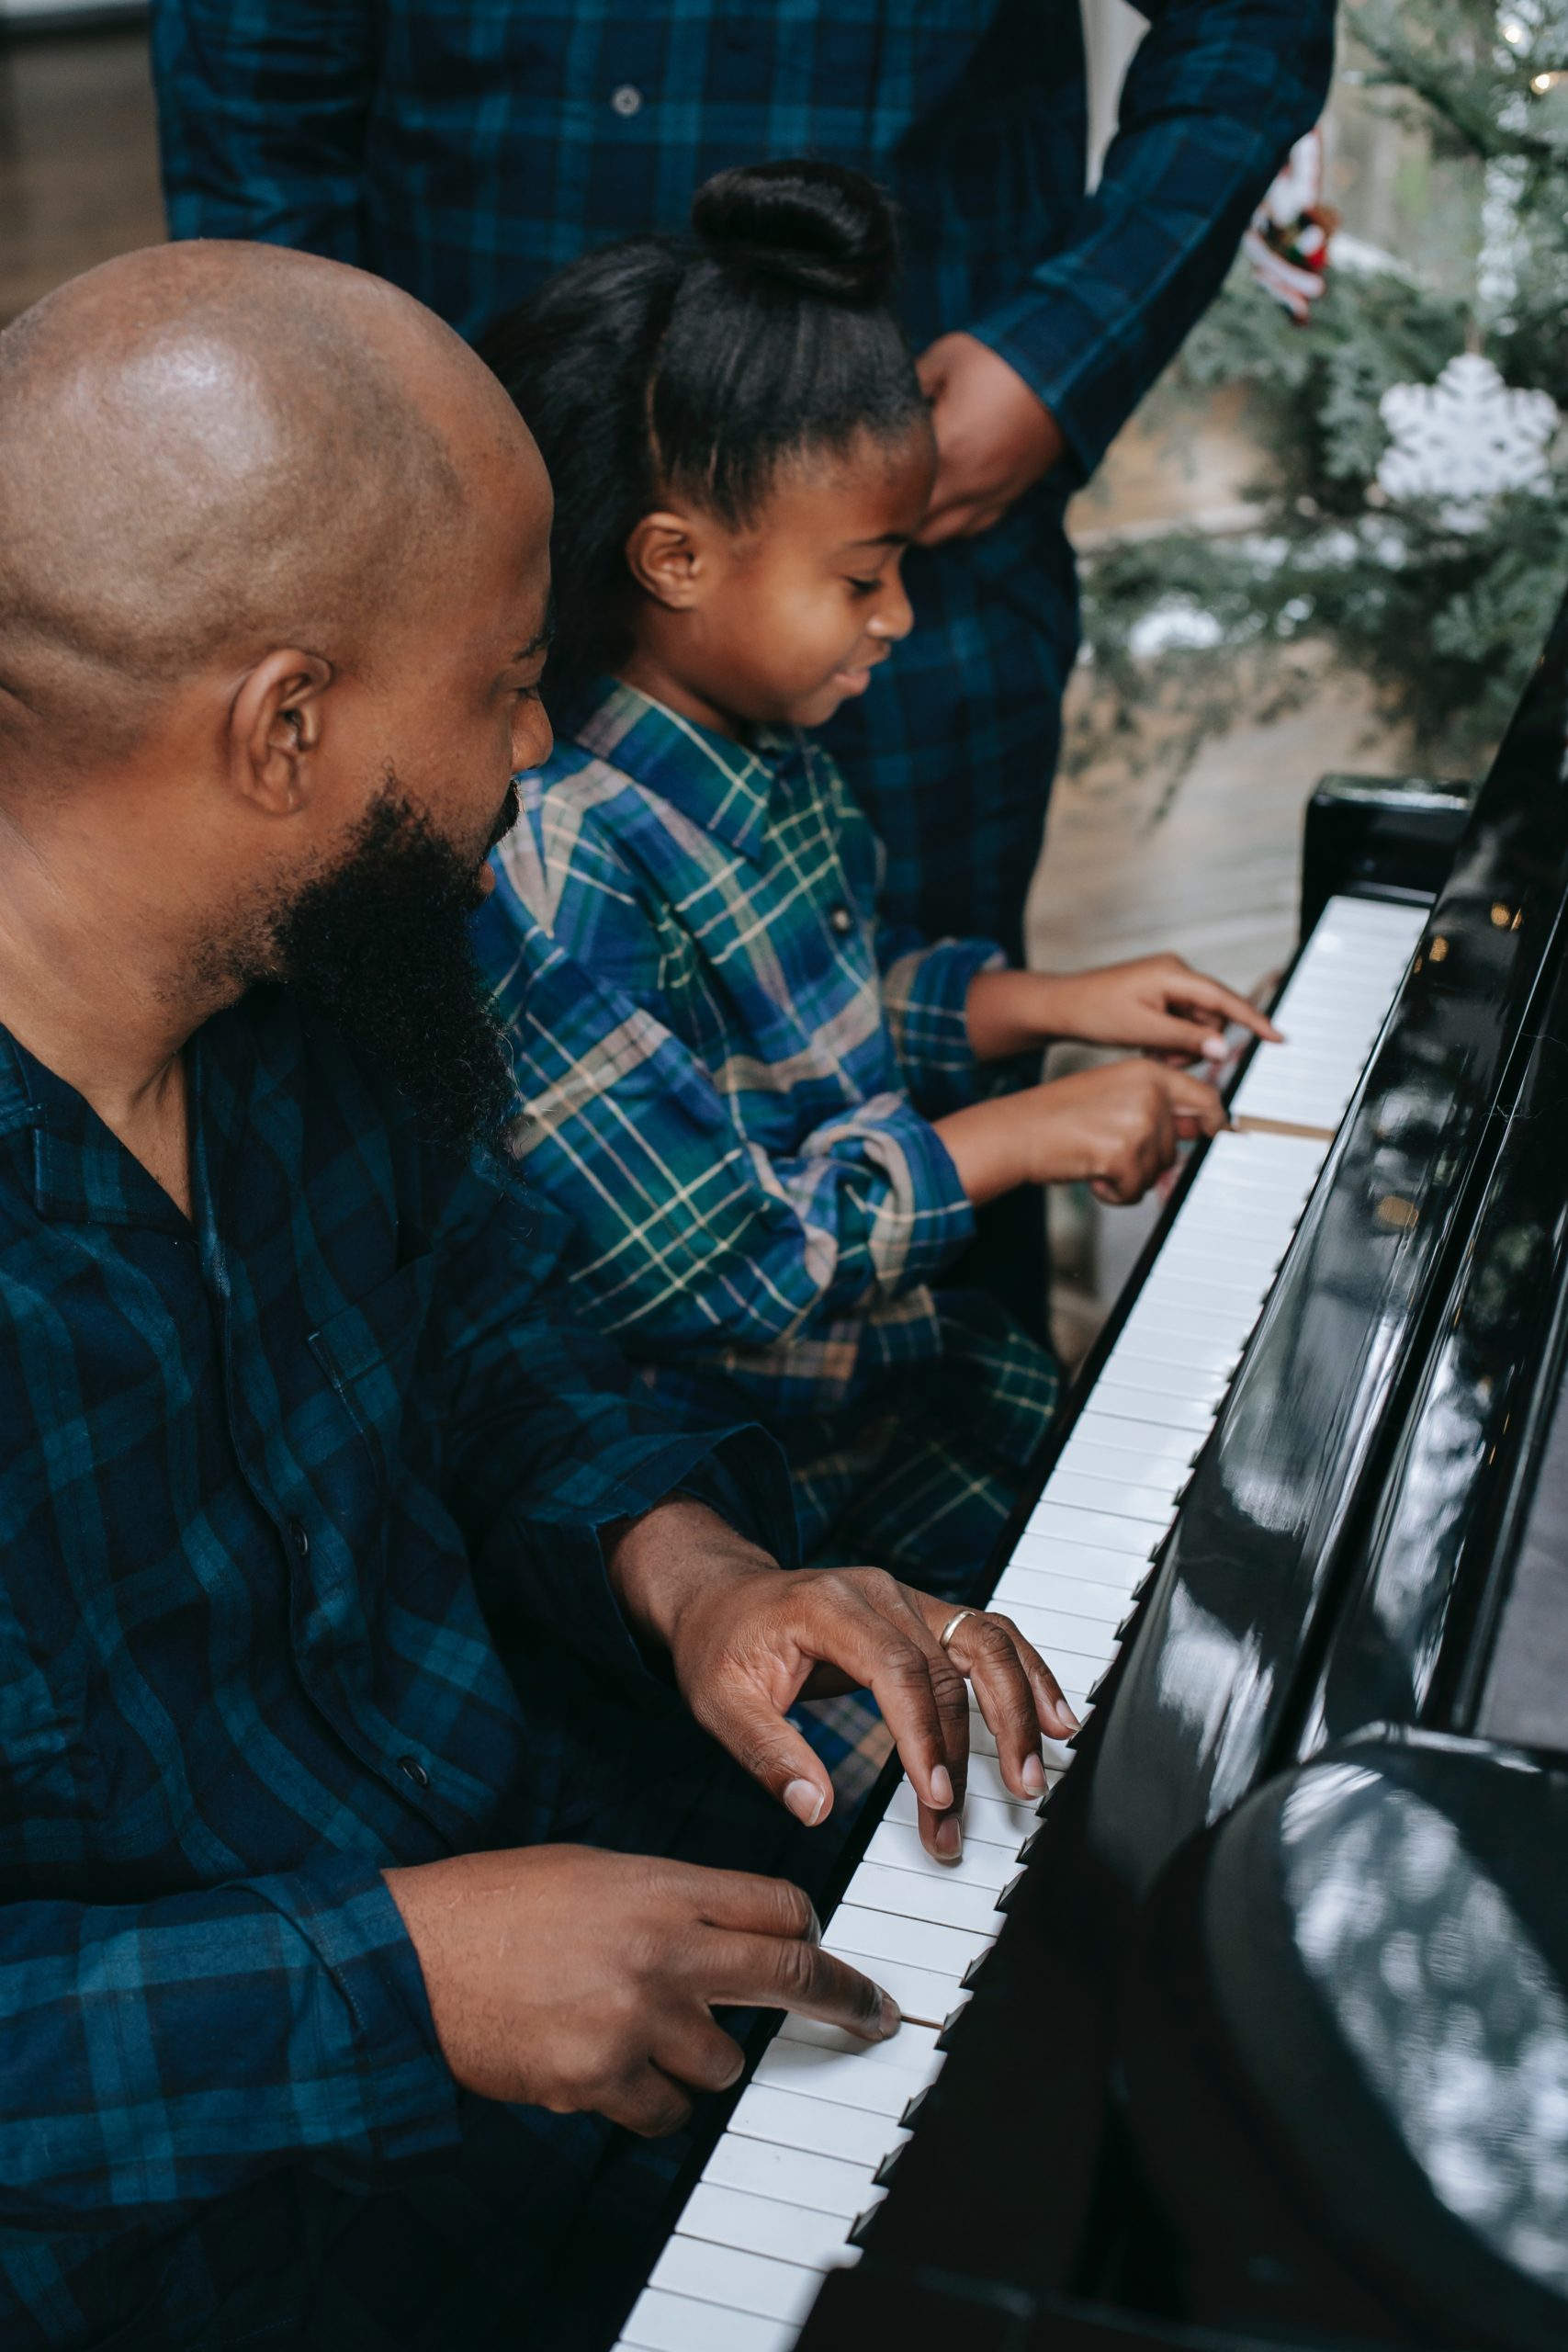 dad with daughter at piano